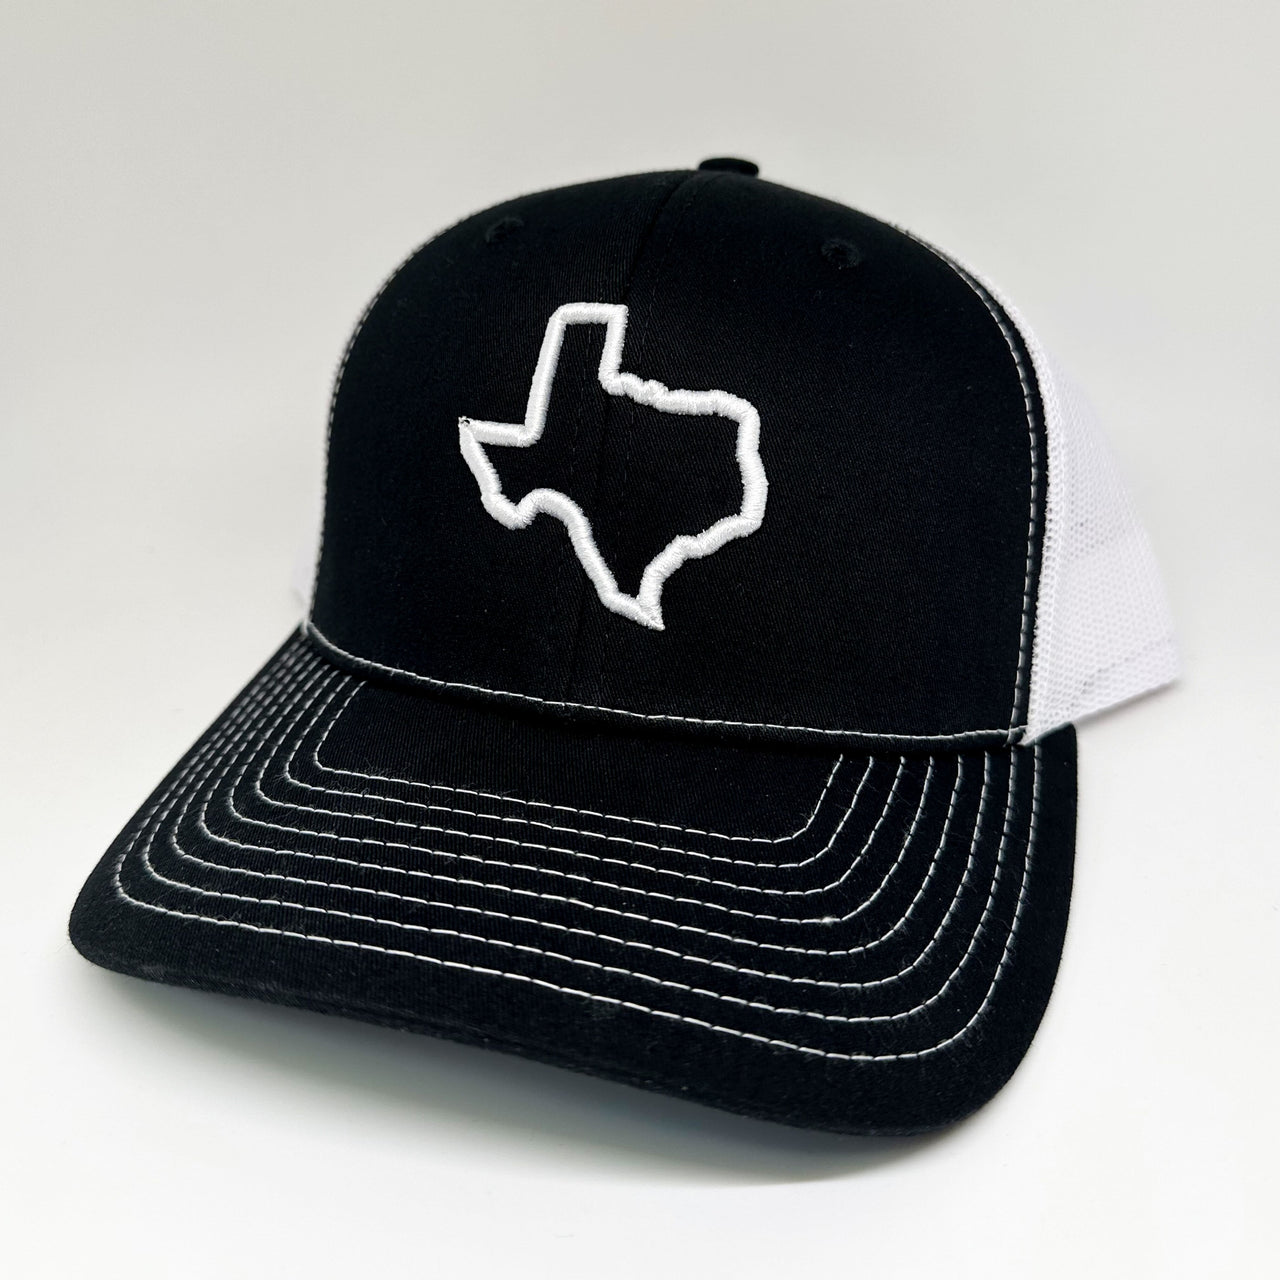 Texas Embroidery Hat - Greater Half